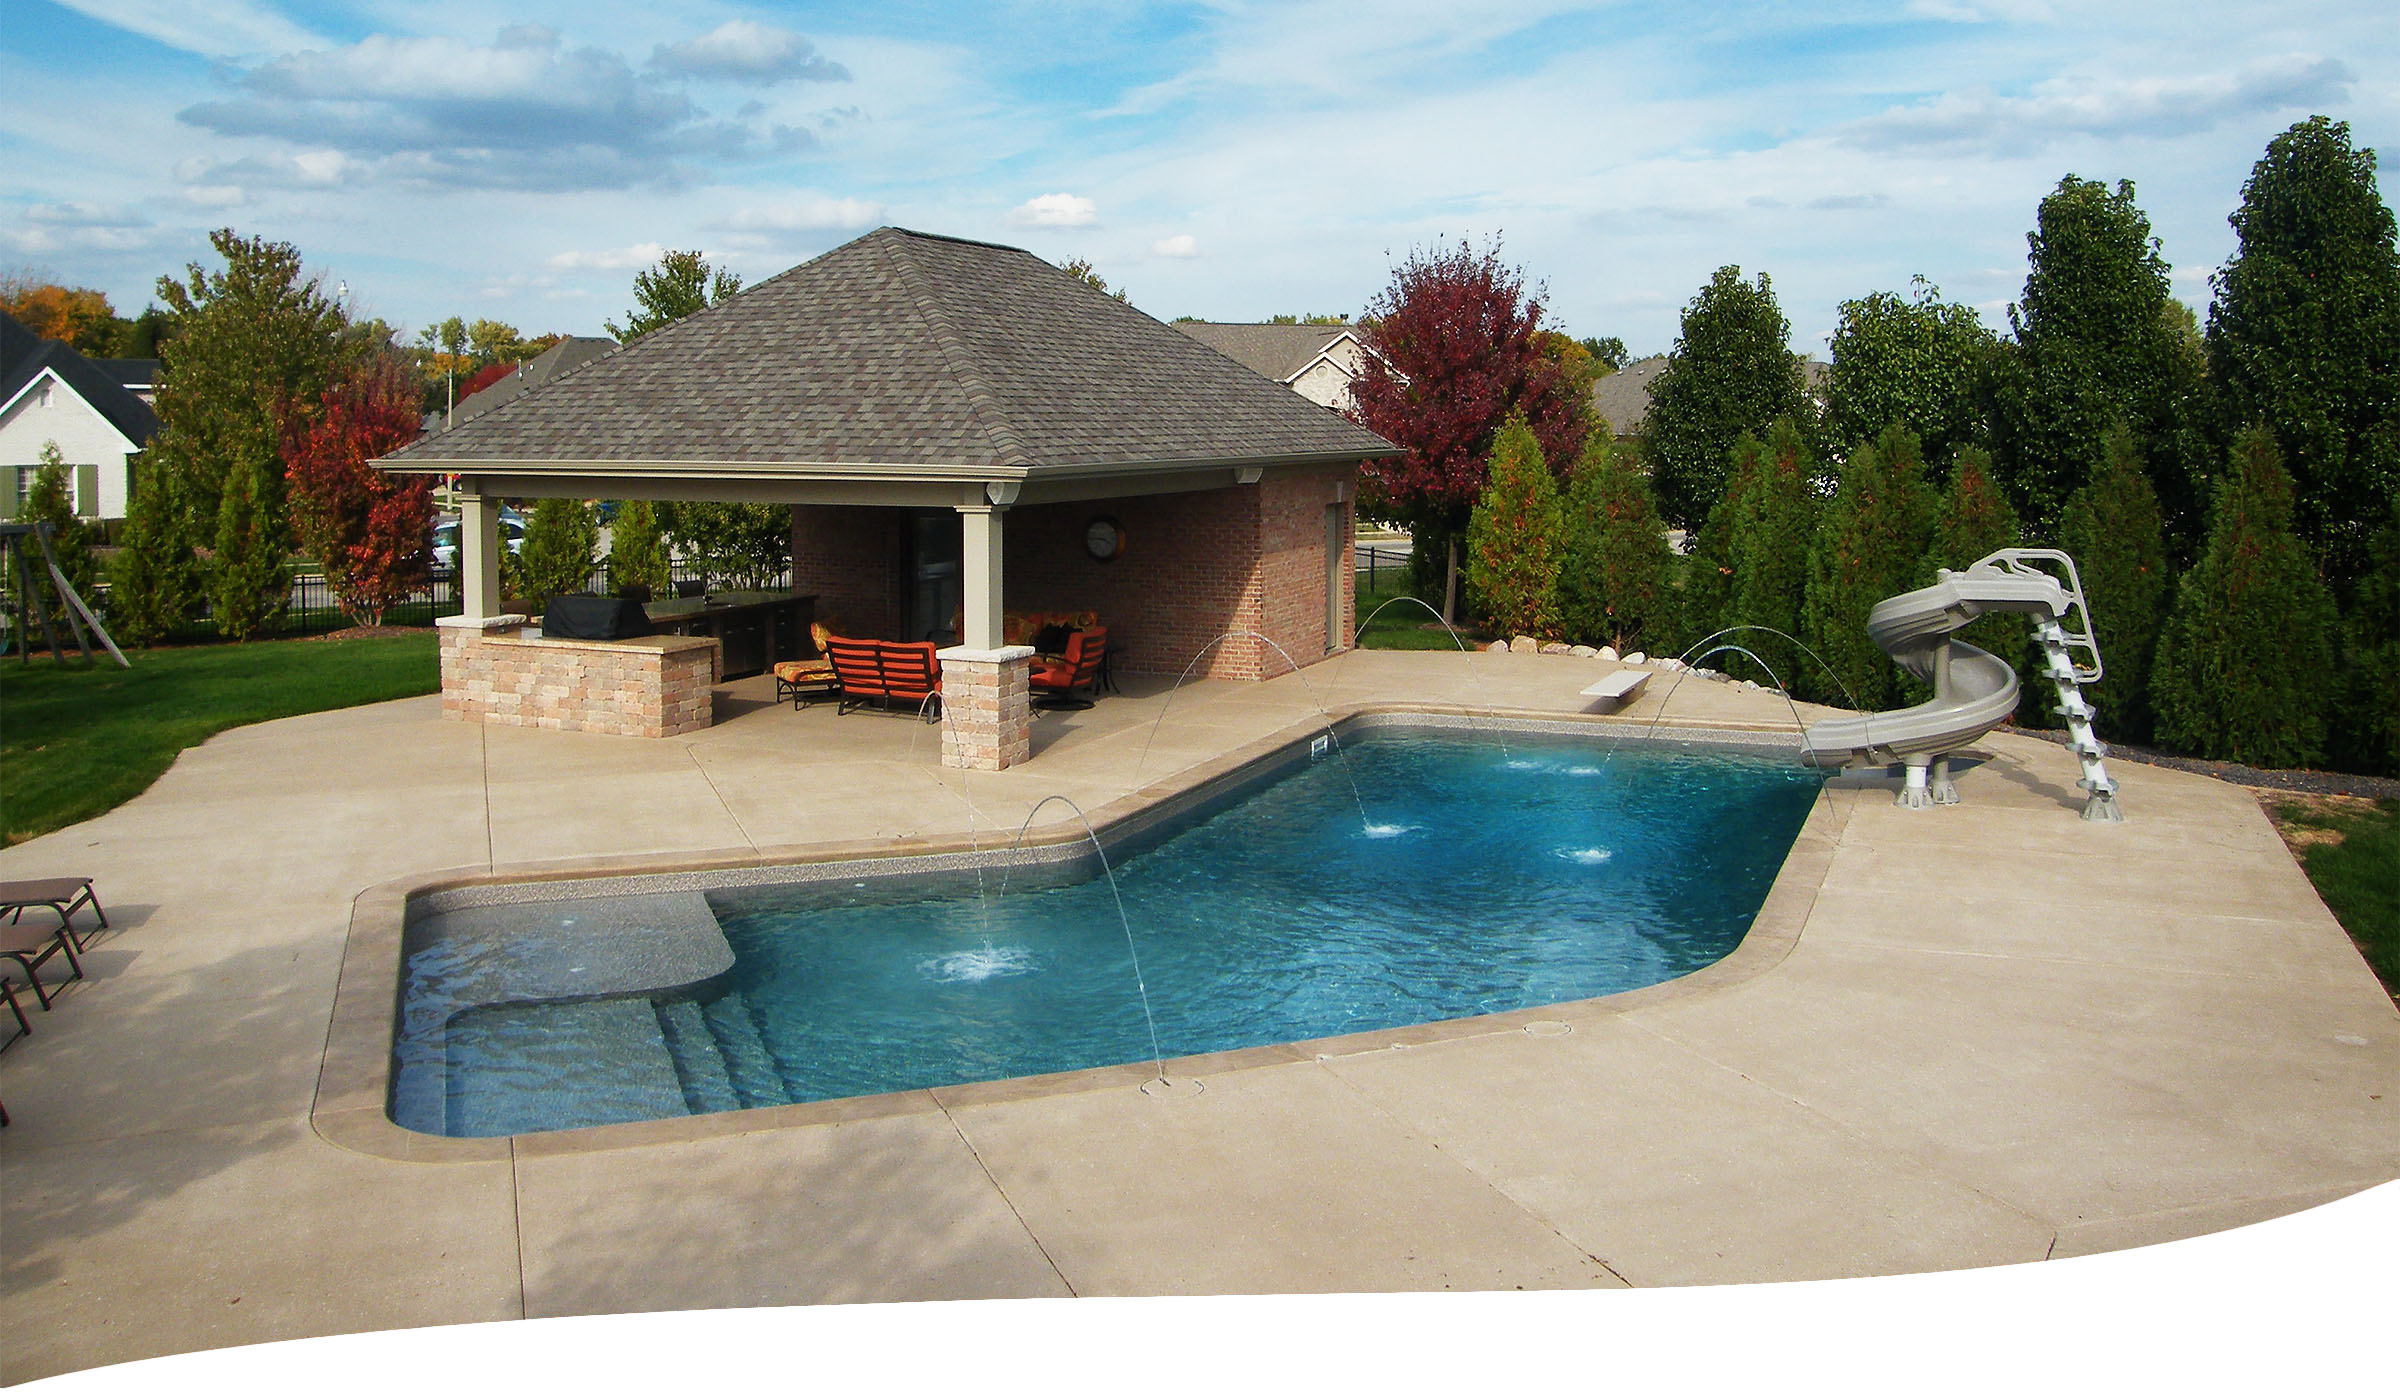 beautiful custom hardscaping, landscaping and pool